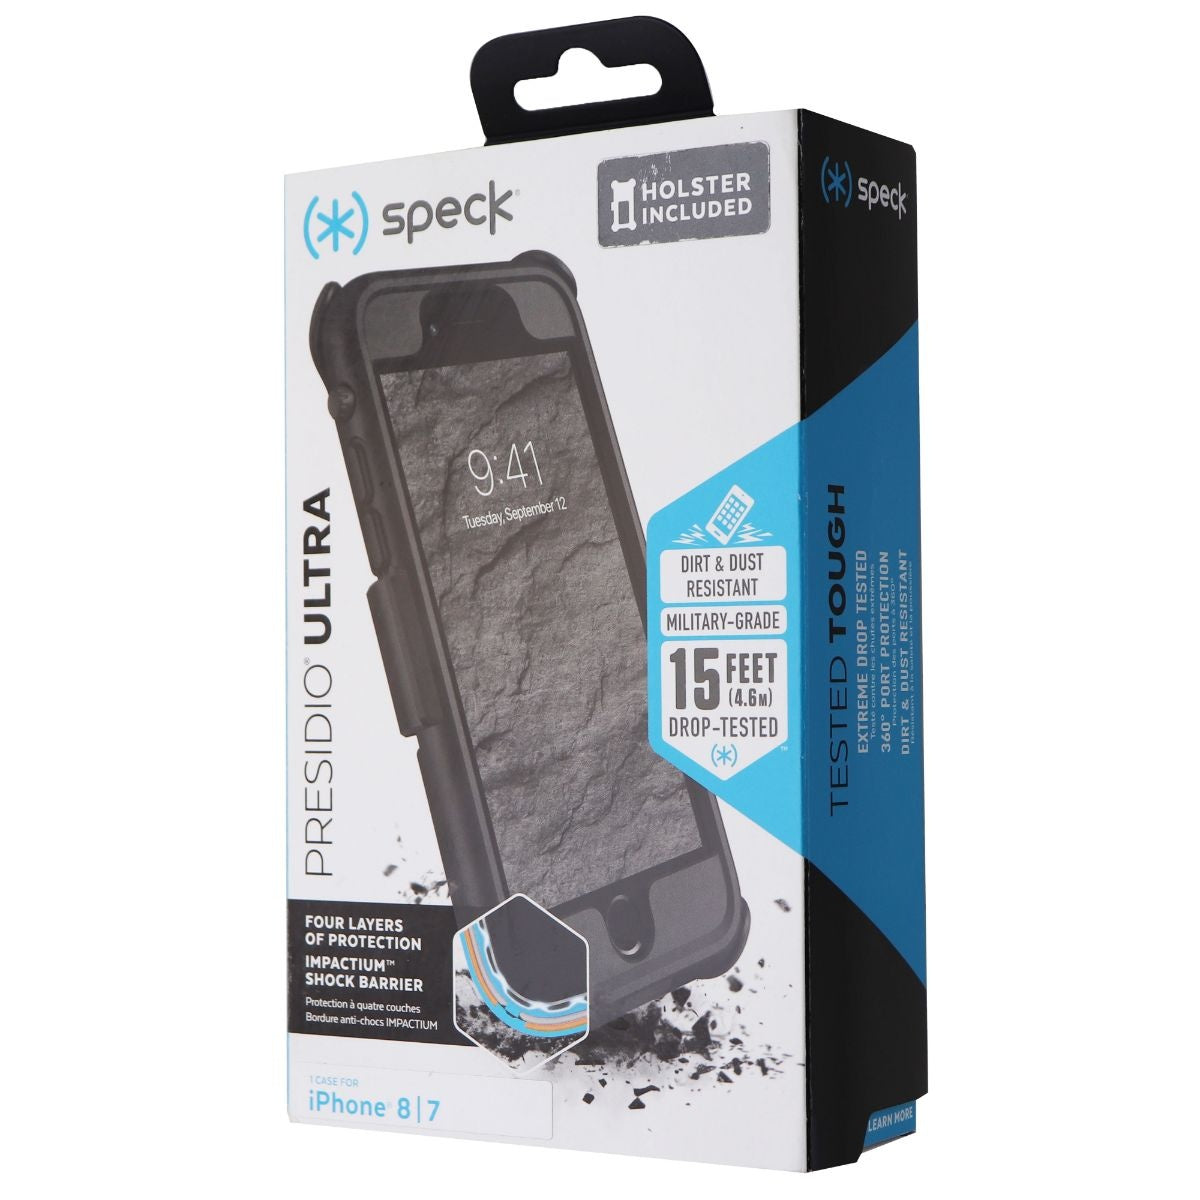 Speck Presidio Ultra Series Protective Case & Holster for iPhone 8 / 7 - Black